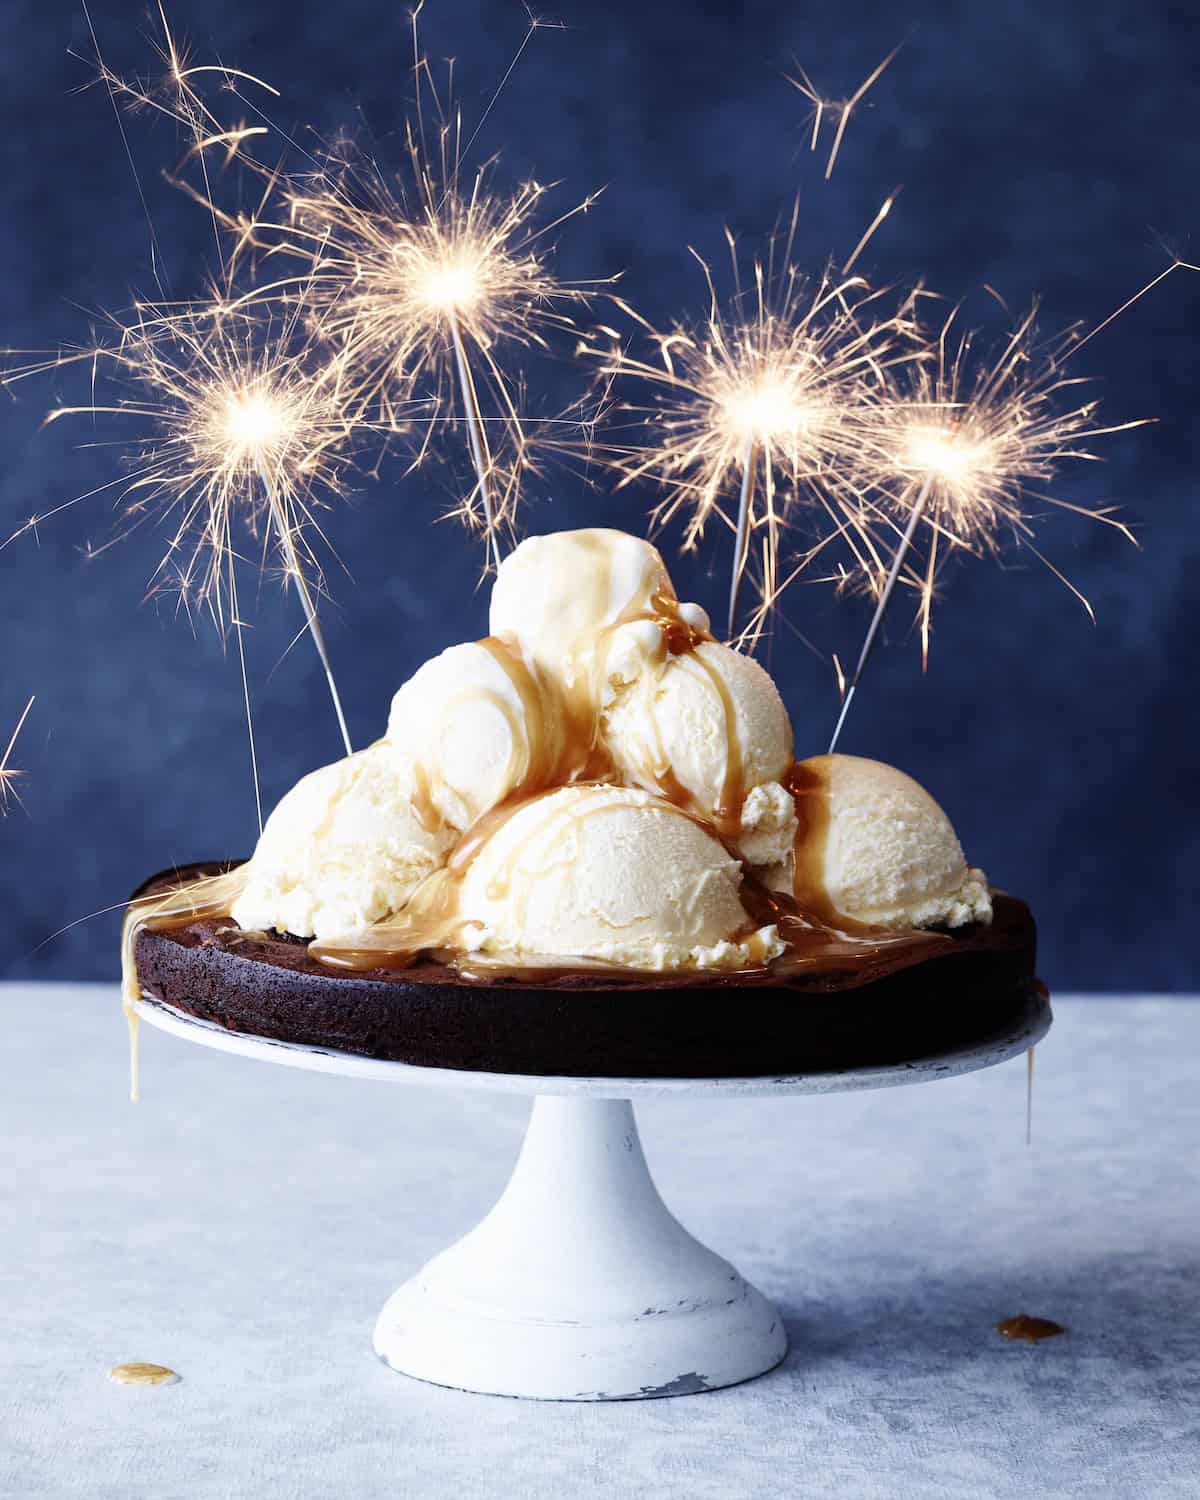 A flourless chocolate cake on a white cake stand, topped with caramel sauced and heaps of vanilla ice cream scoops, along with sparkler candles that are lit up.